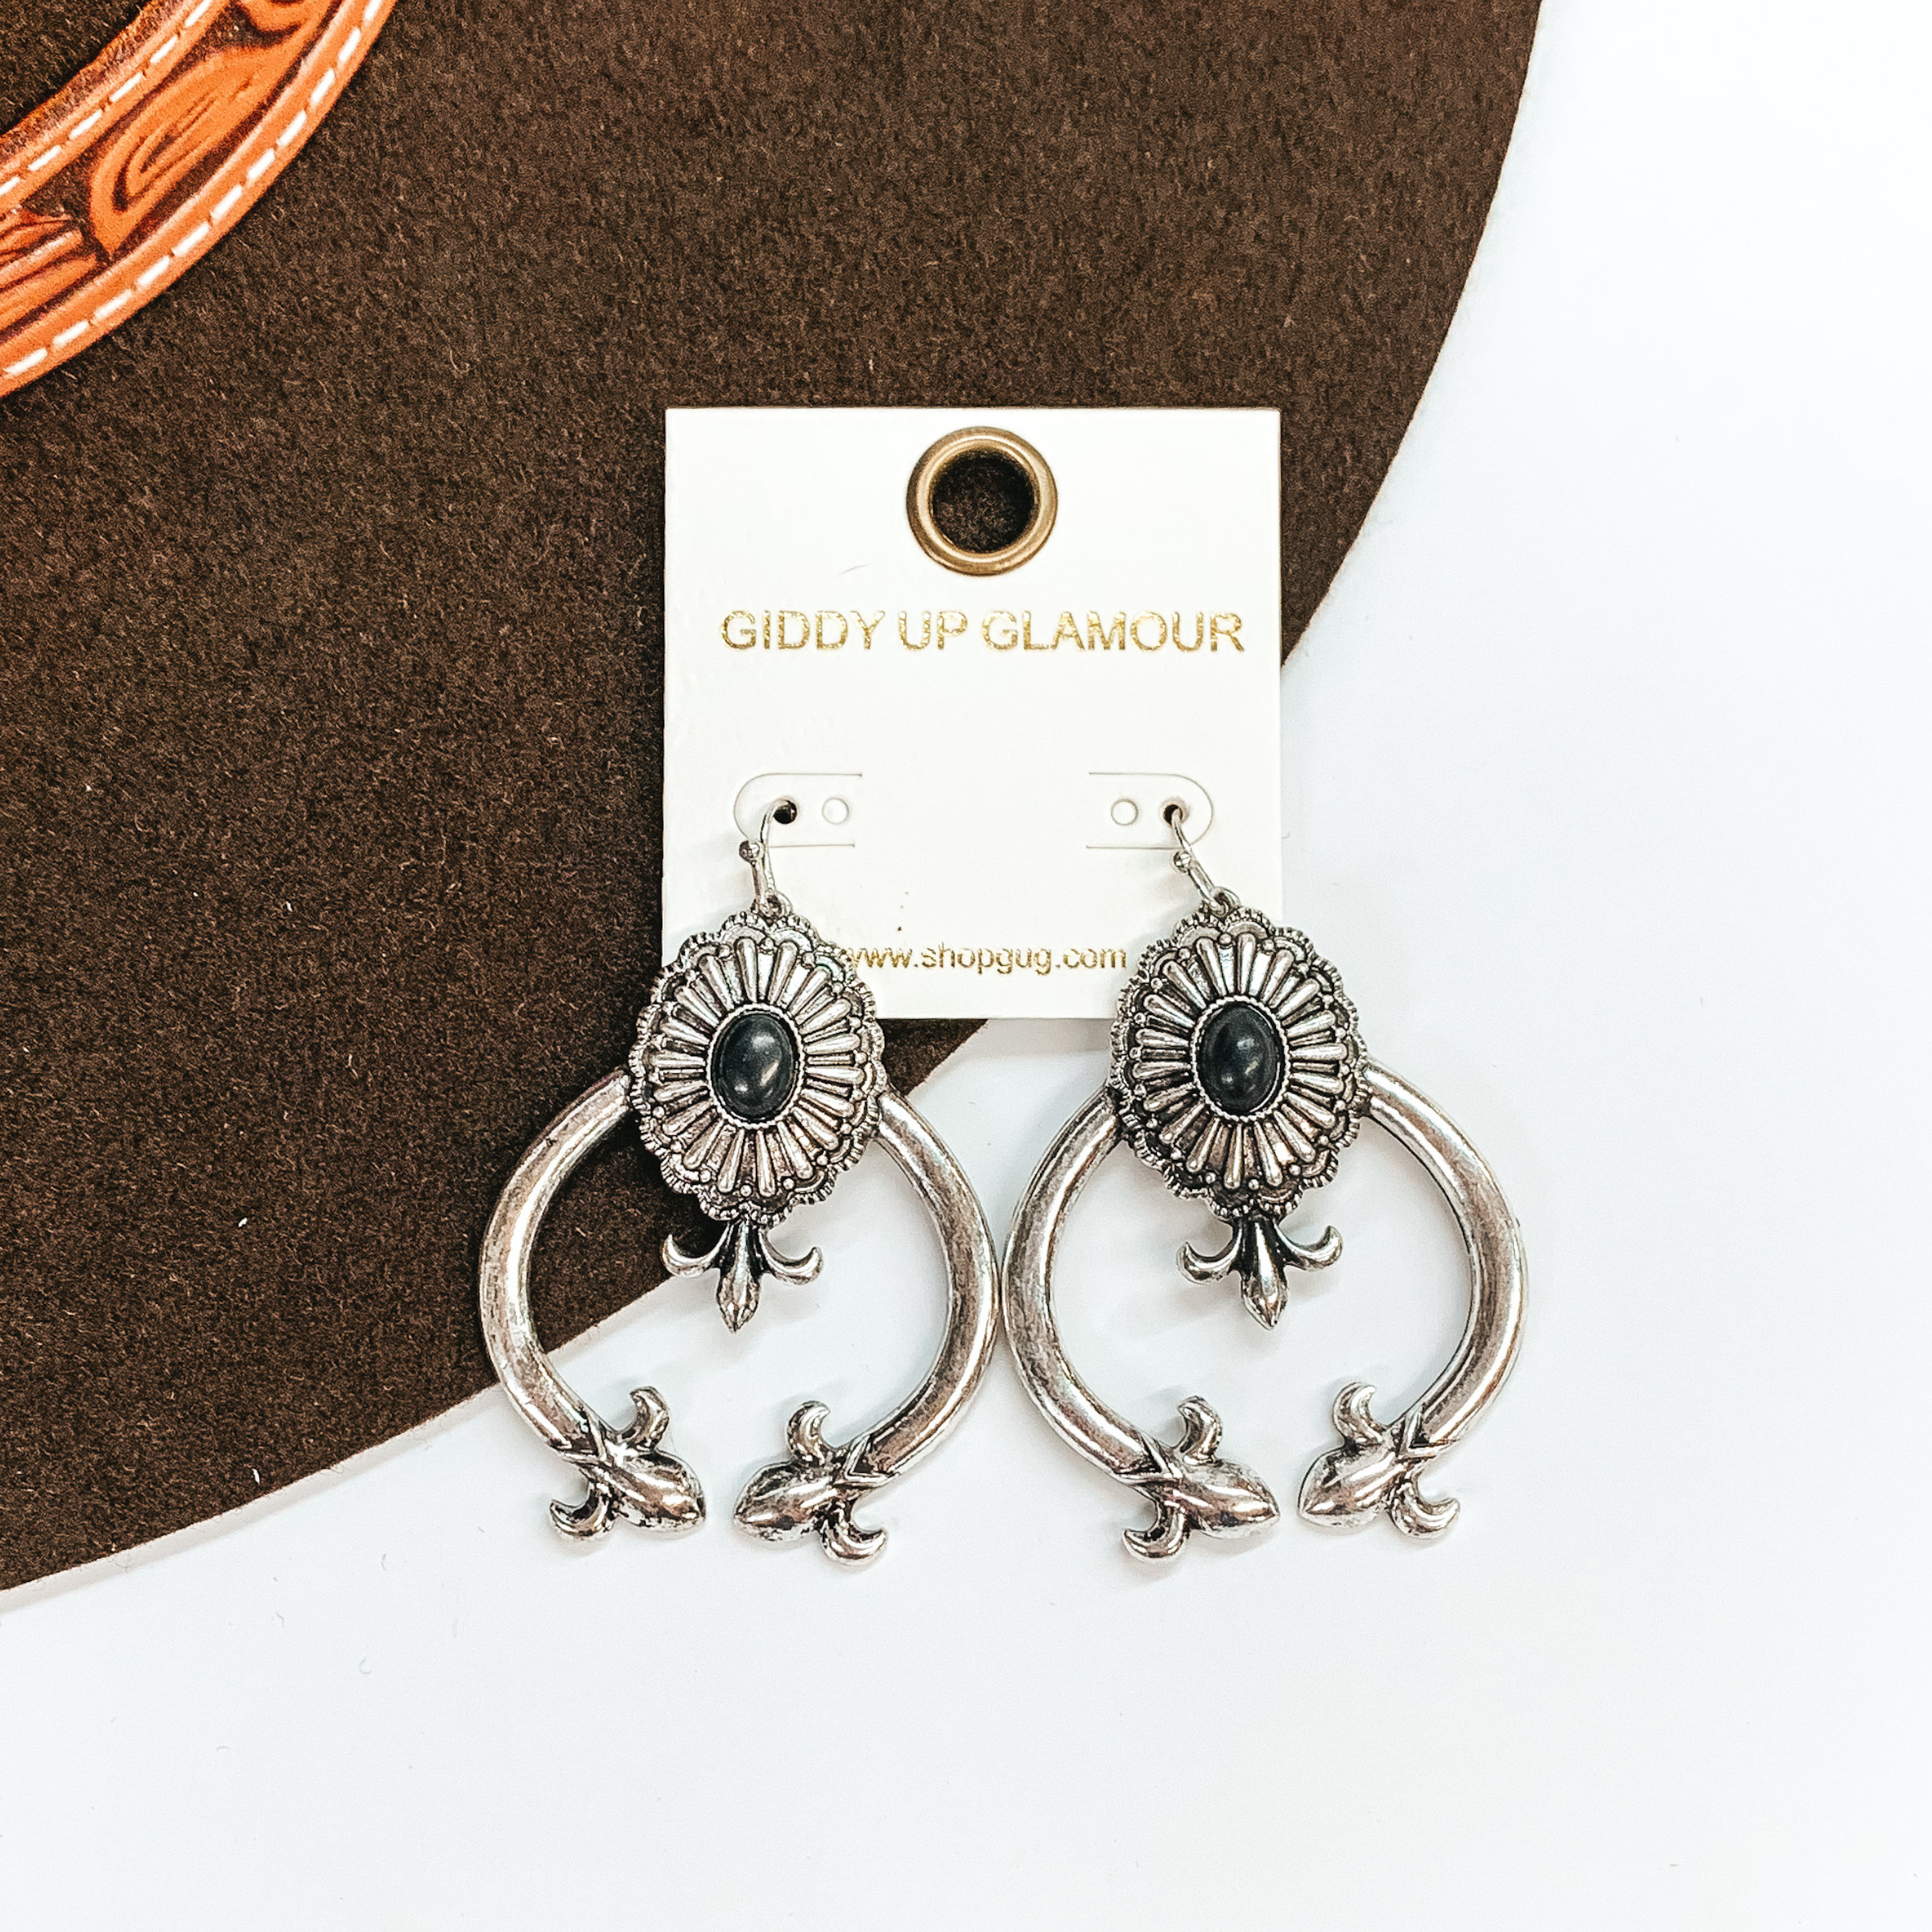 These are silver squash blossom earrings with a concho in the center and  a small oval faux stone in black. The squash blossom have pointy ends and under the concho. These earrings are taken laying on a dark brown  brim hat and on a white background.